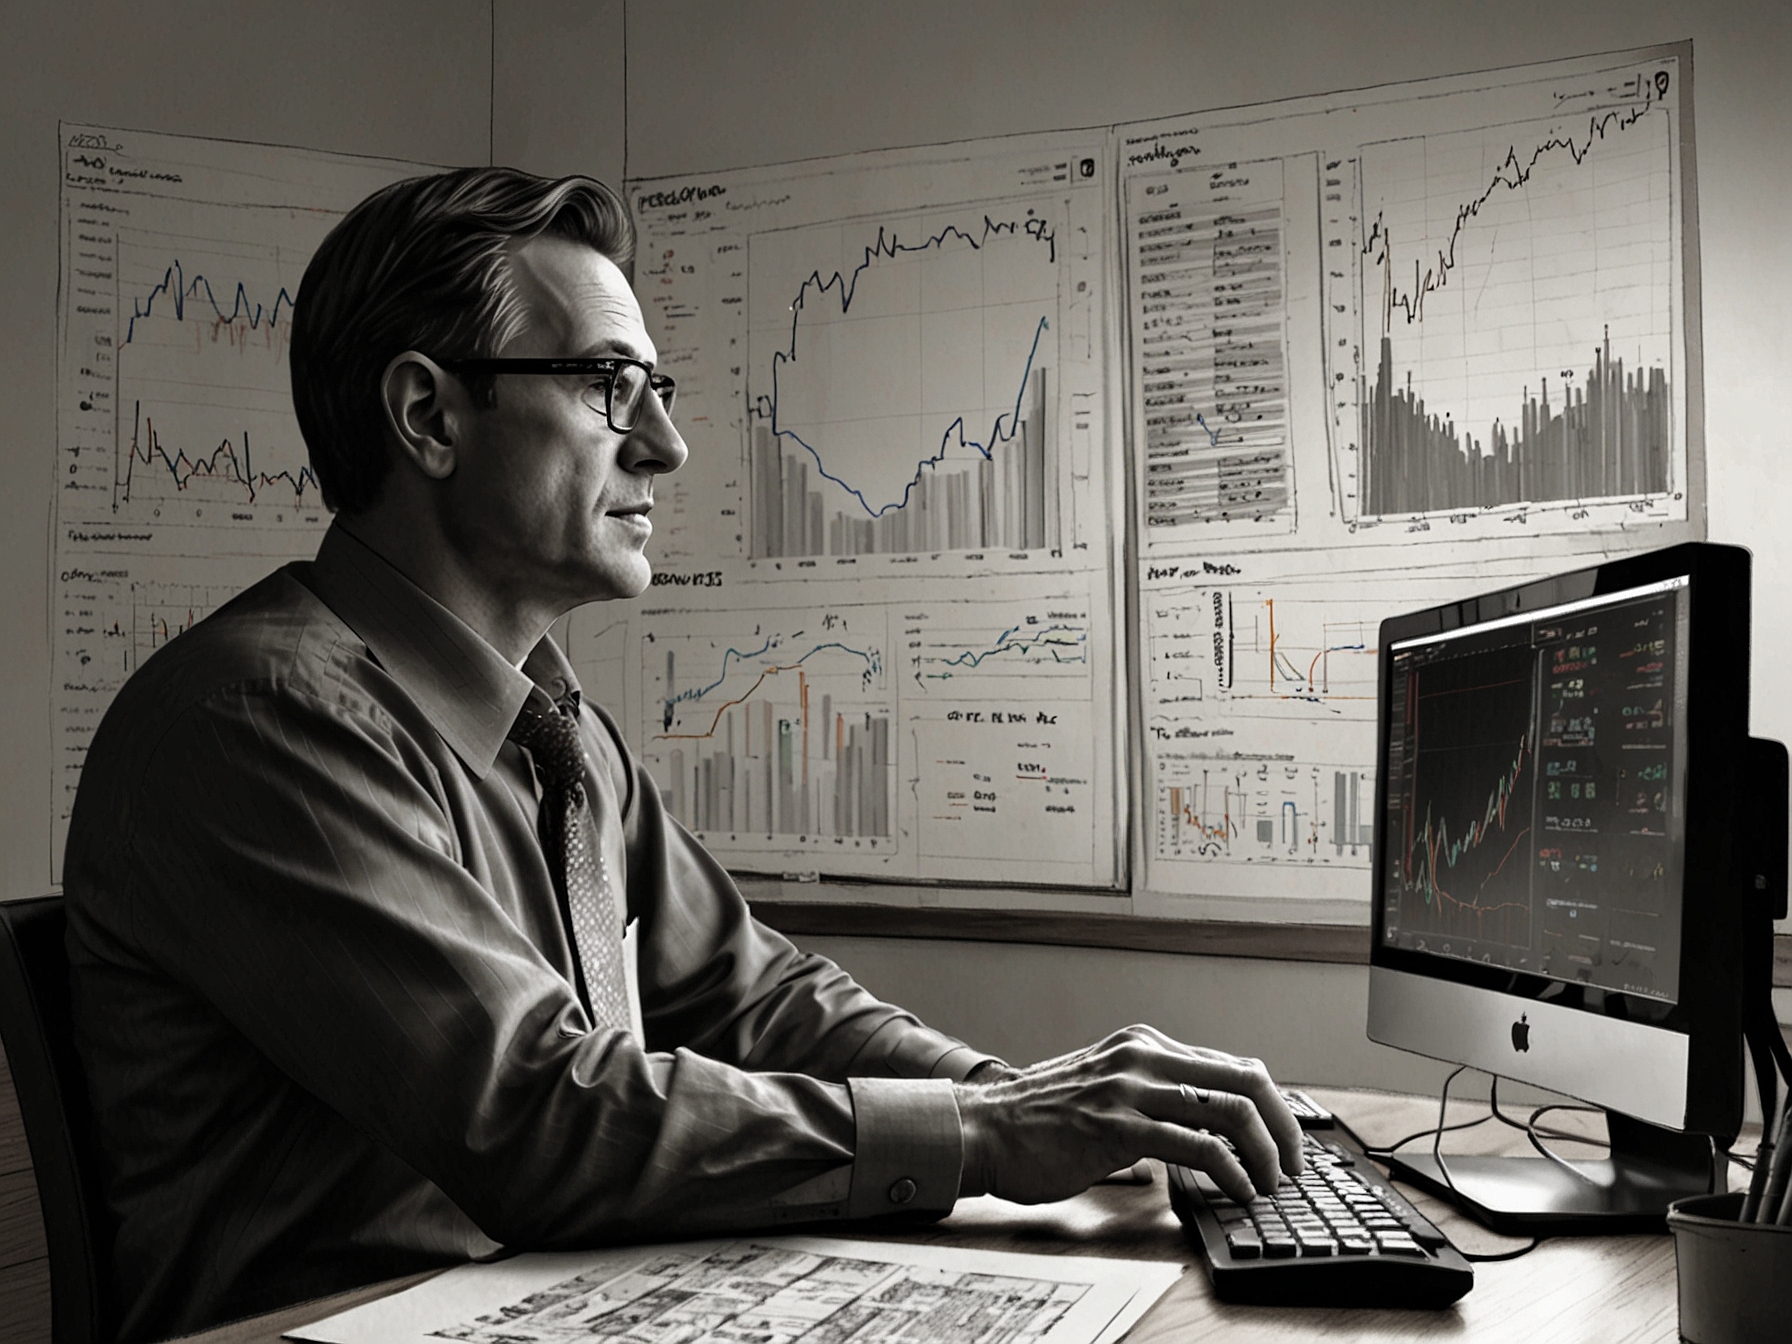 An investor analyzing financial news and data on a computer, focusing on ITC's recent strategic initiatives and market performance to make informed investment decisions.